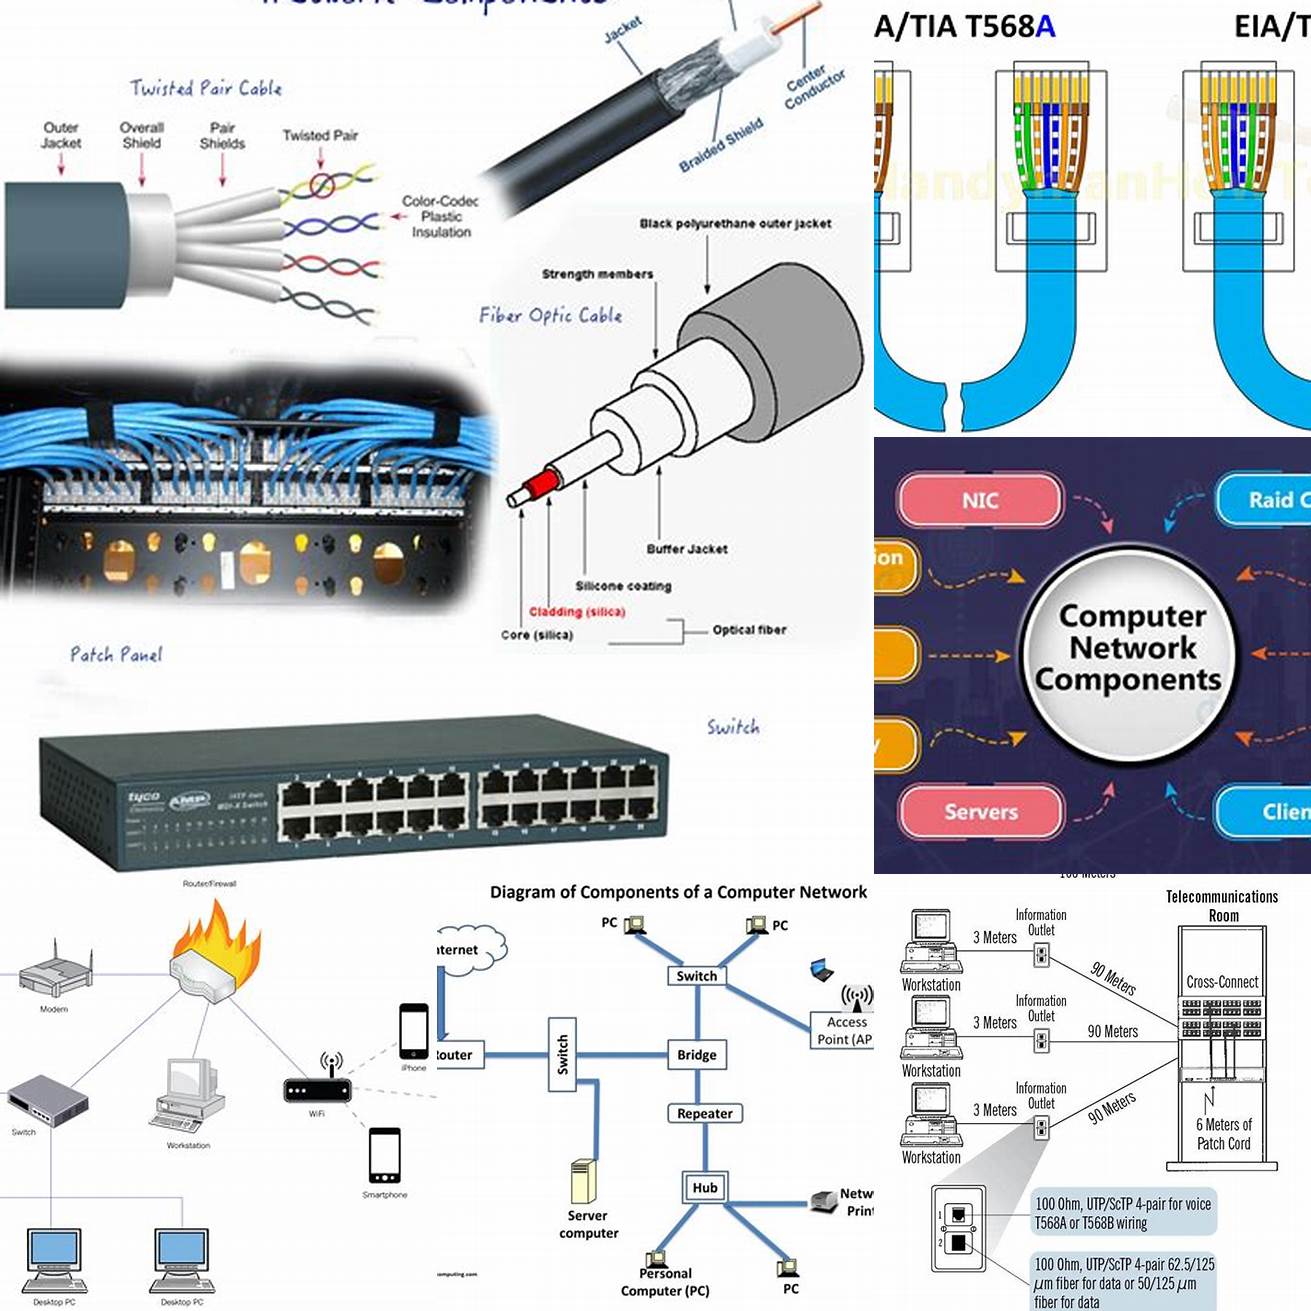 Network components